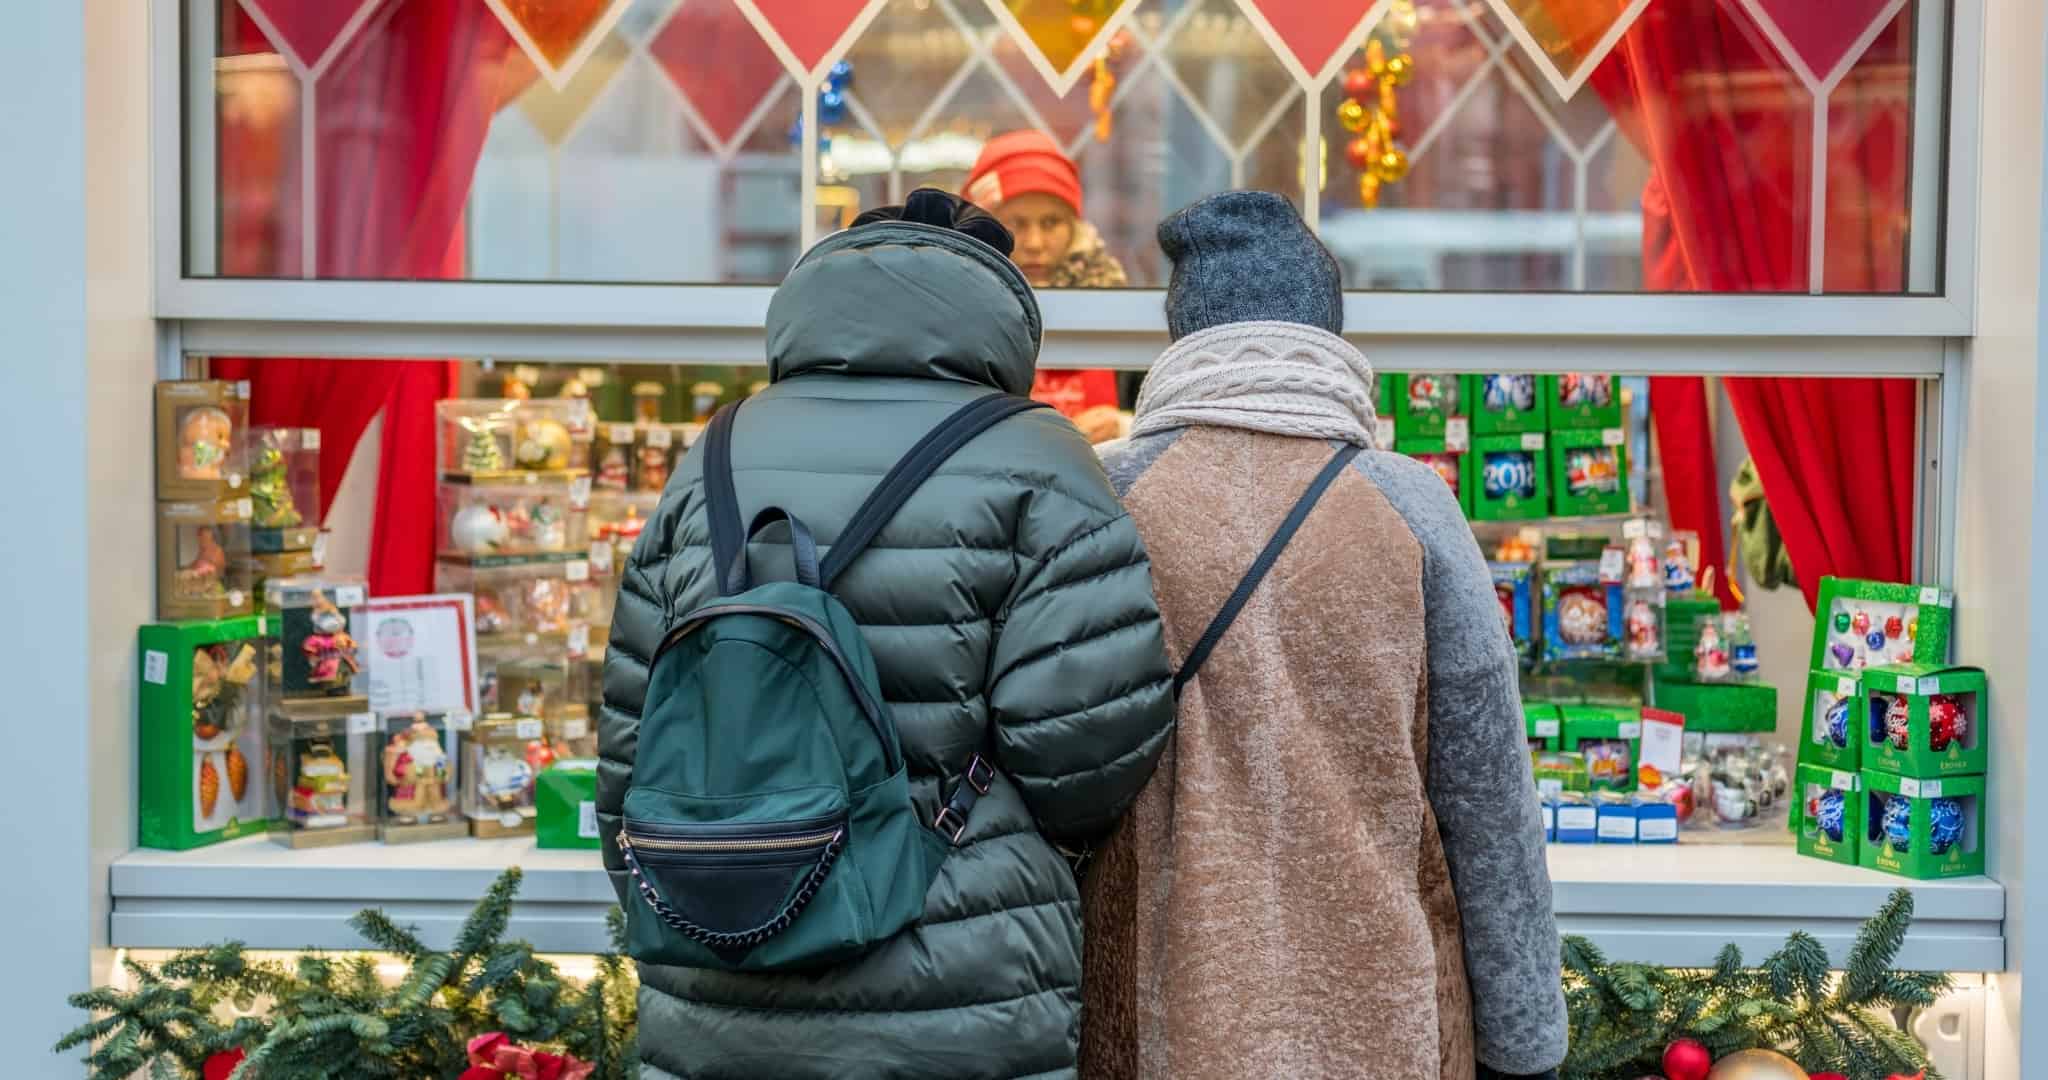 Couple in front of Christmas shop window buying presents